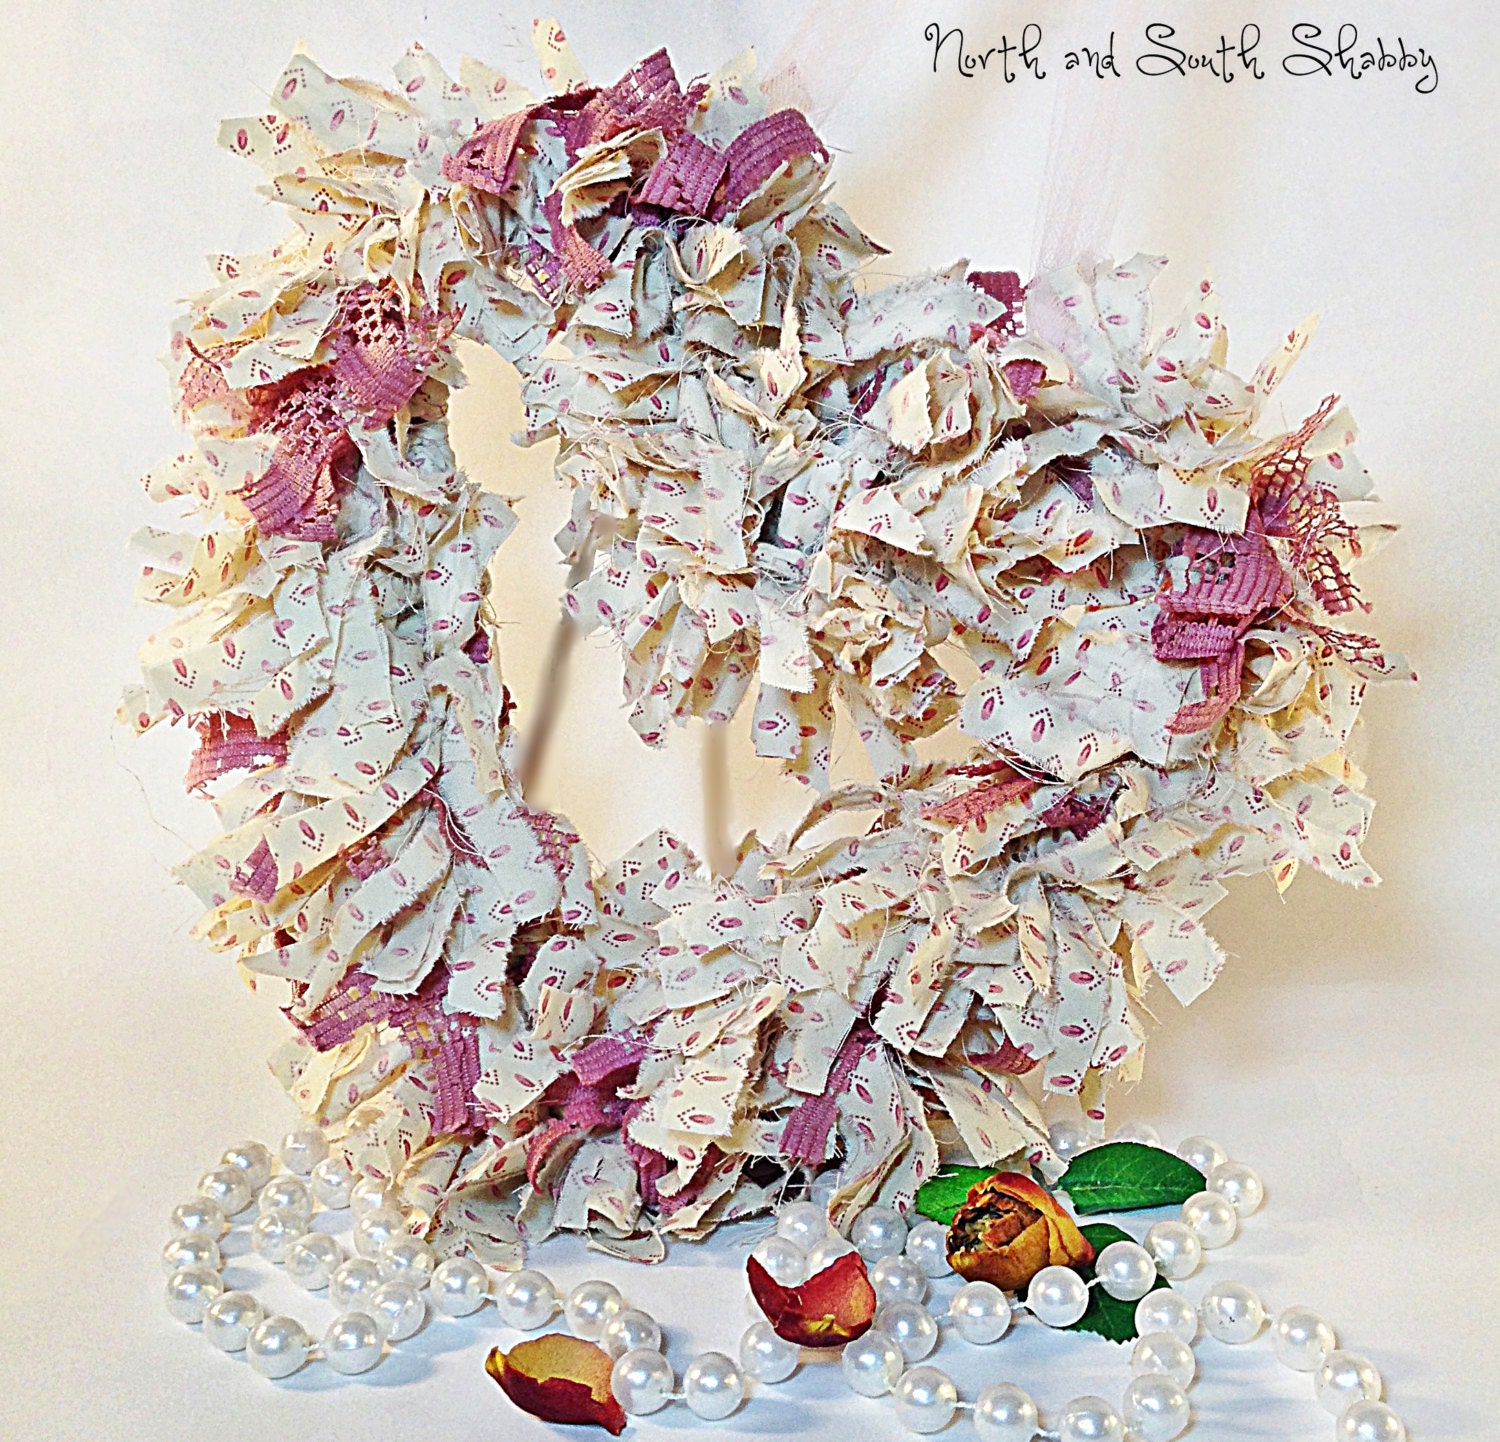 Heart Rag Wreath White with Pink Shabby Home Decor - northandsouthshabby